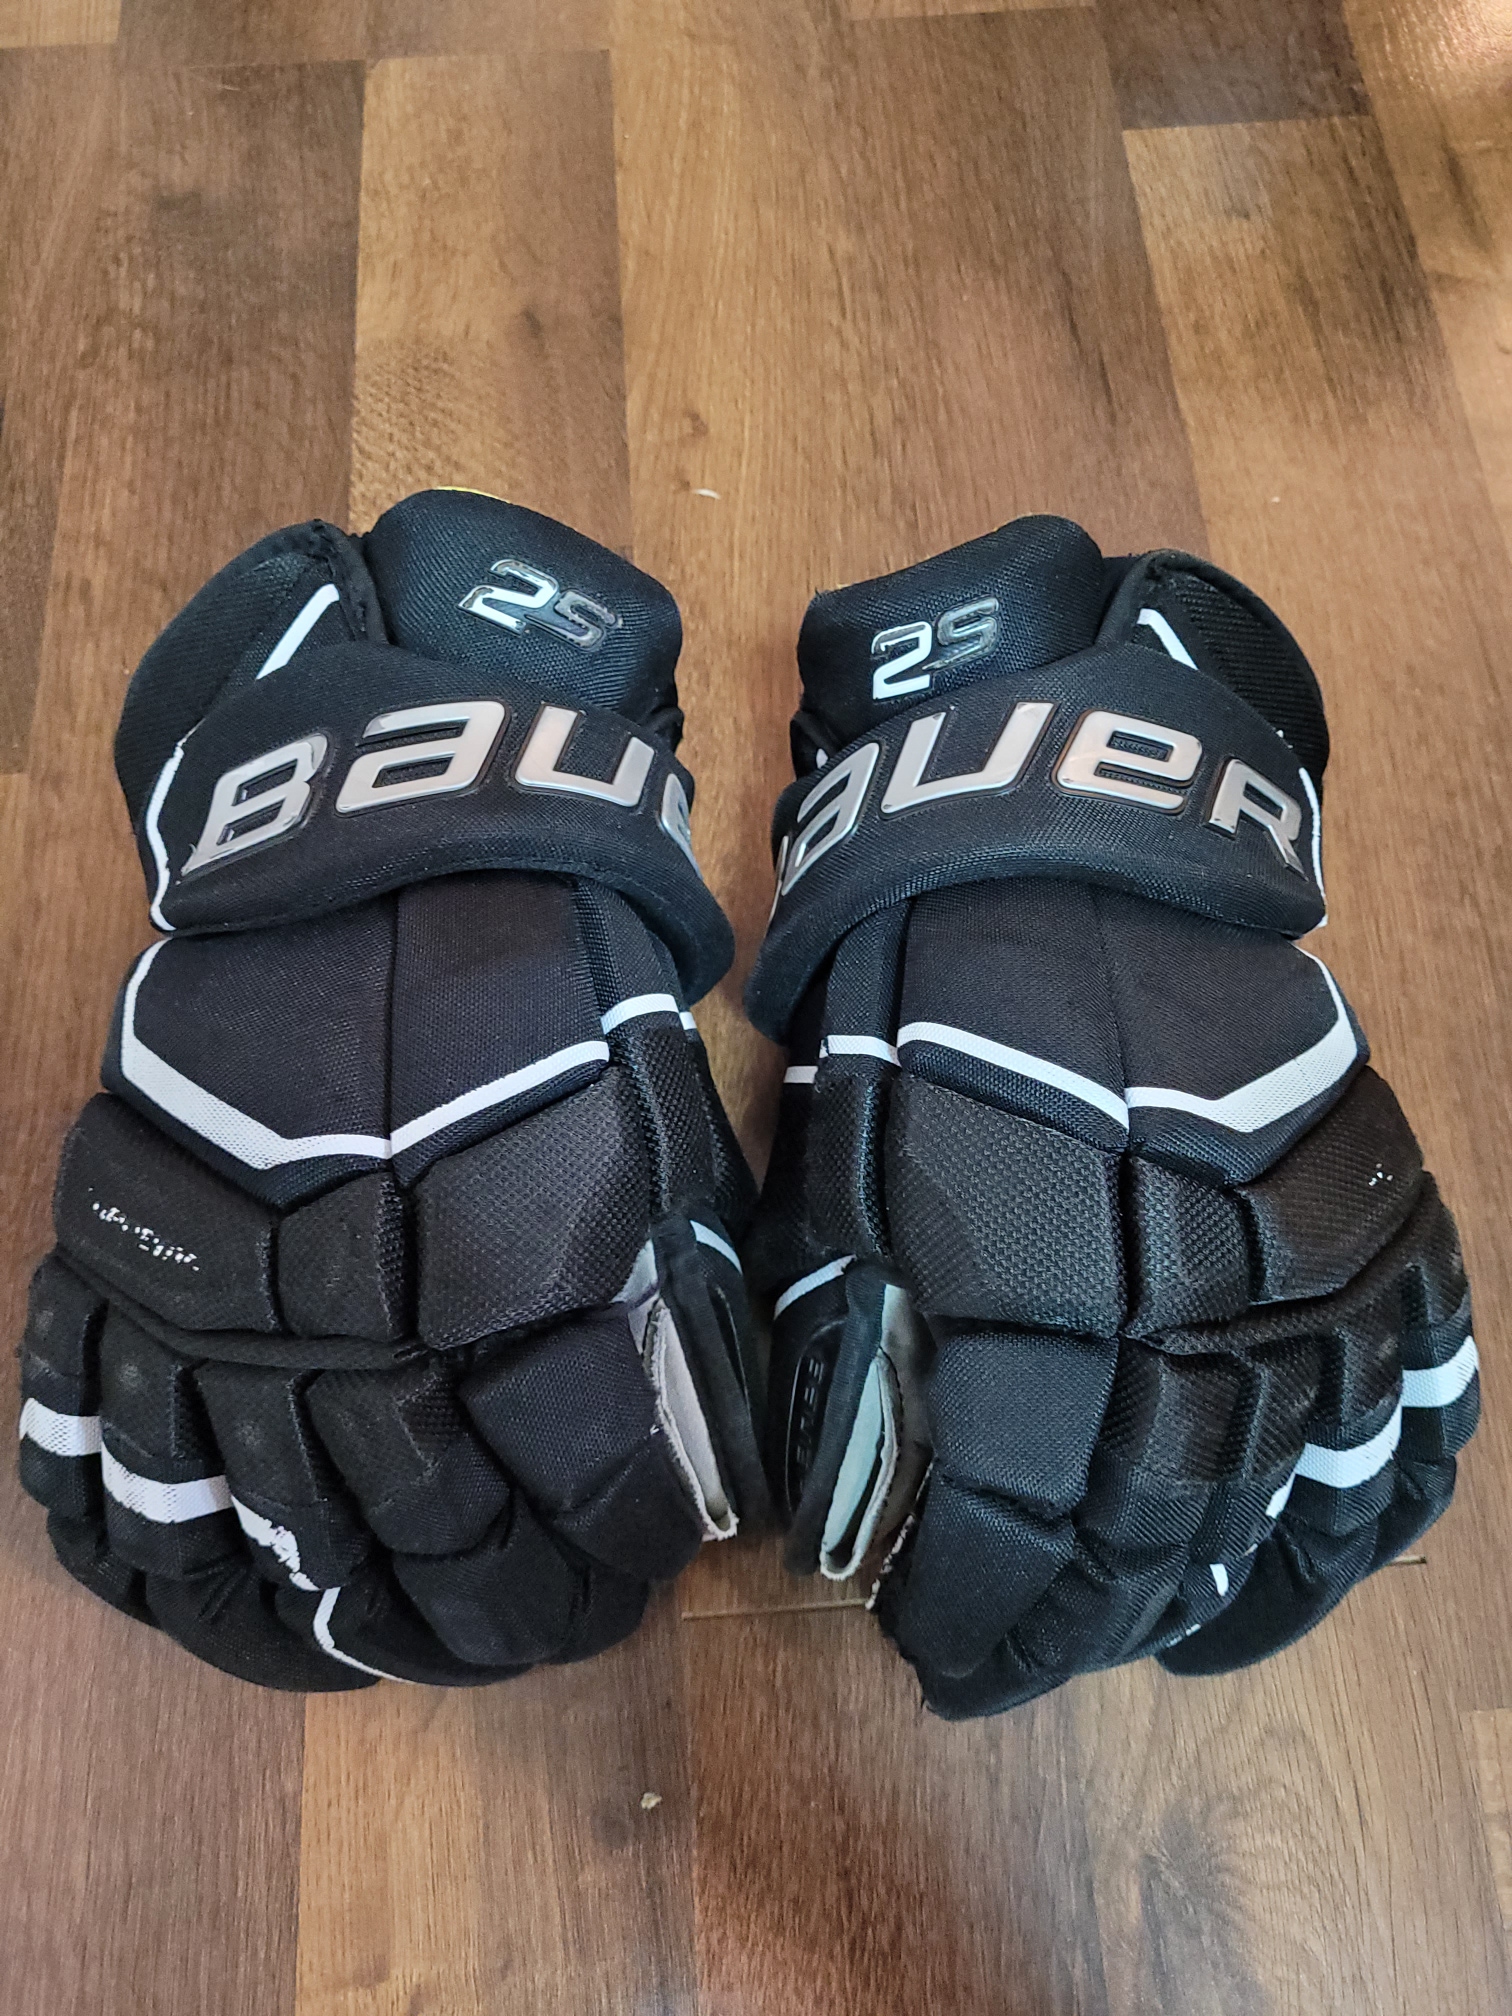 Used Bauer Supreme 2S Gloves 14"